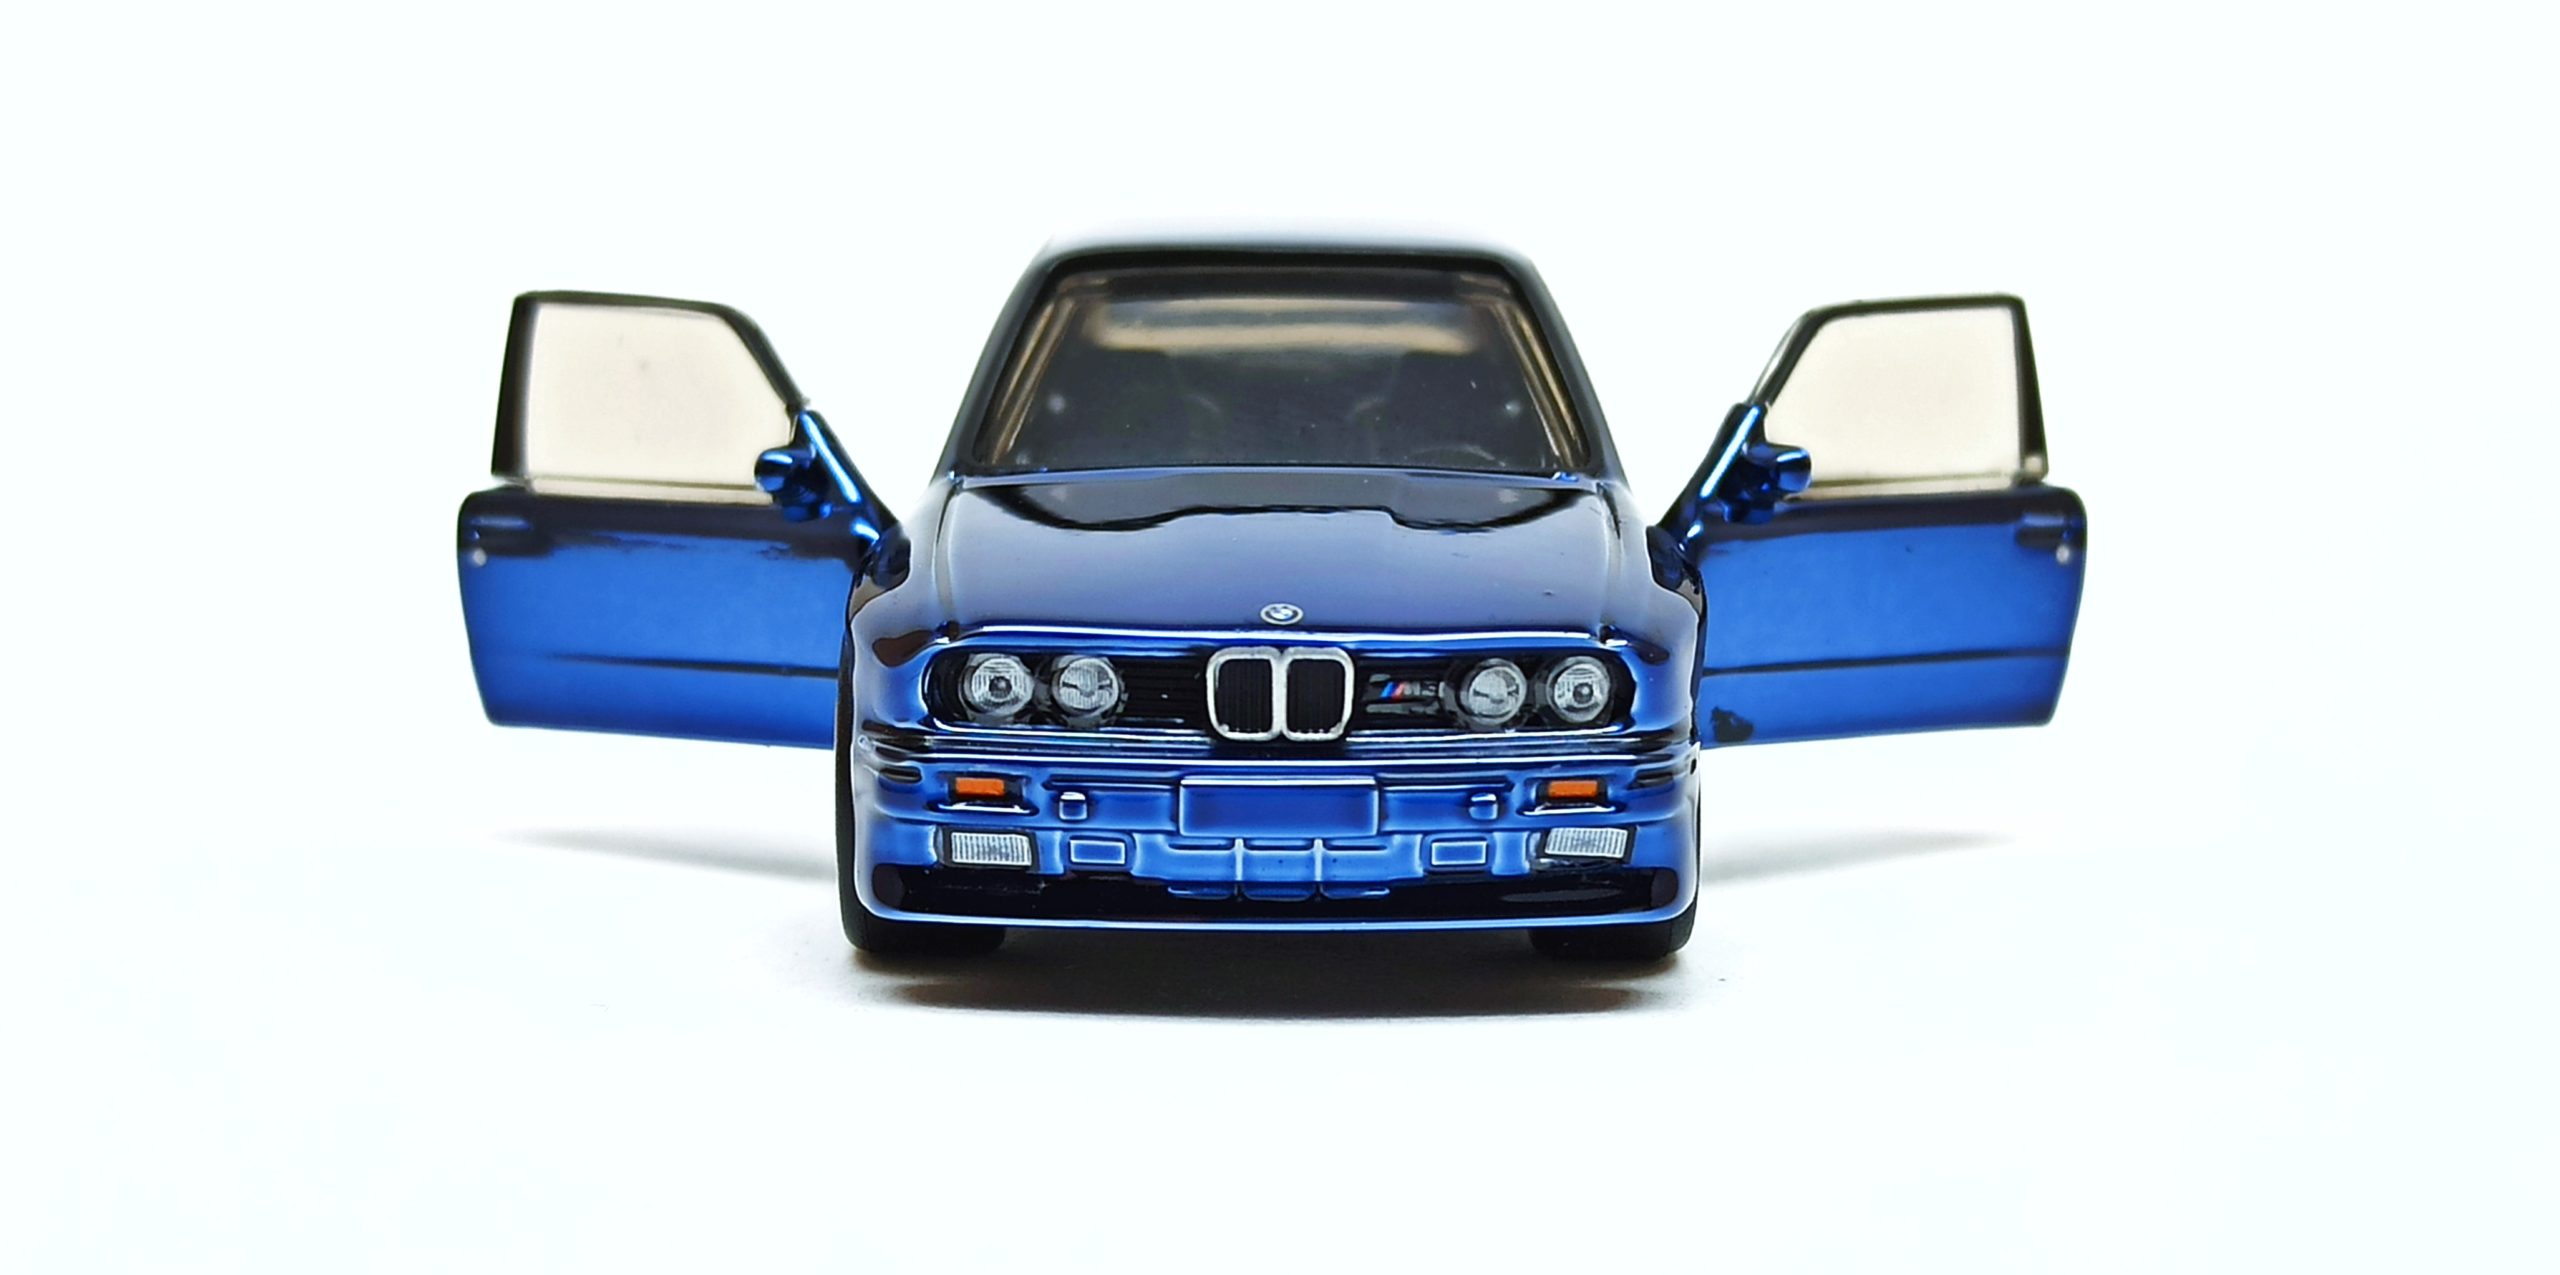 Hot Wheels 1991 BMW M3 (GXJ17) 2022 RLC Exclusive (1 of 30.000) spectraflame blue